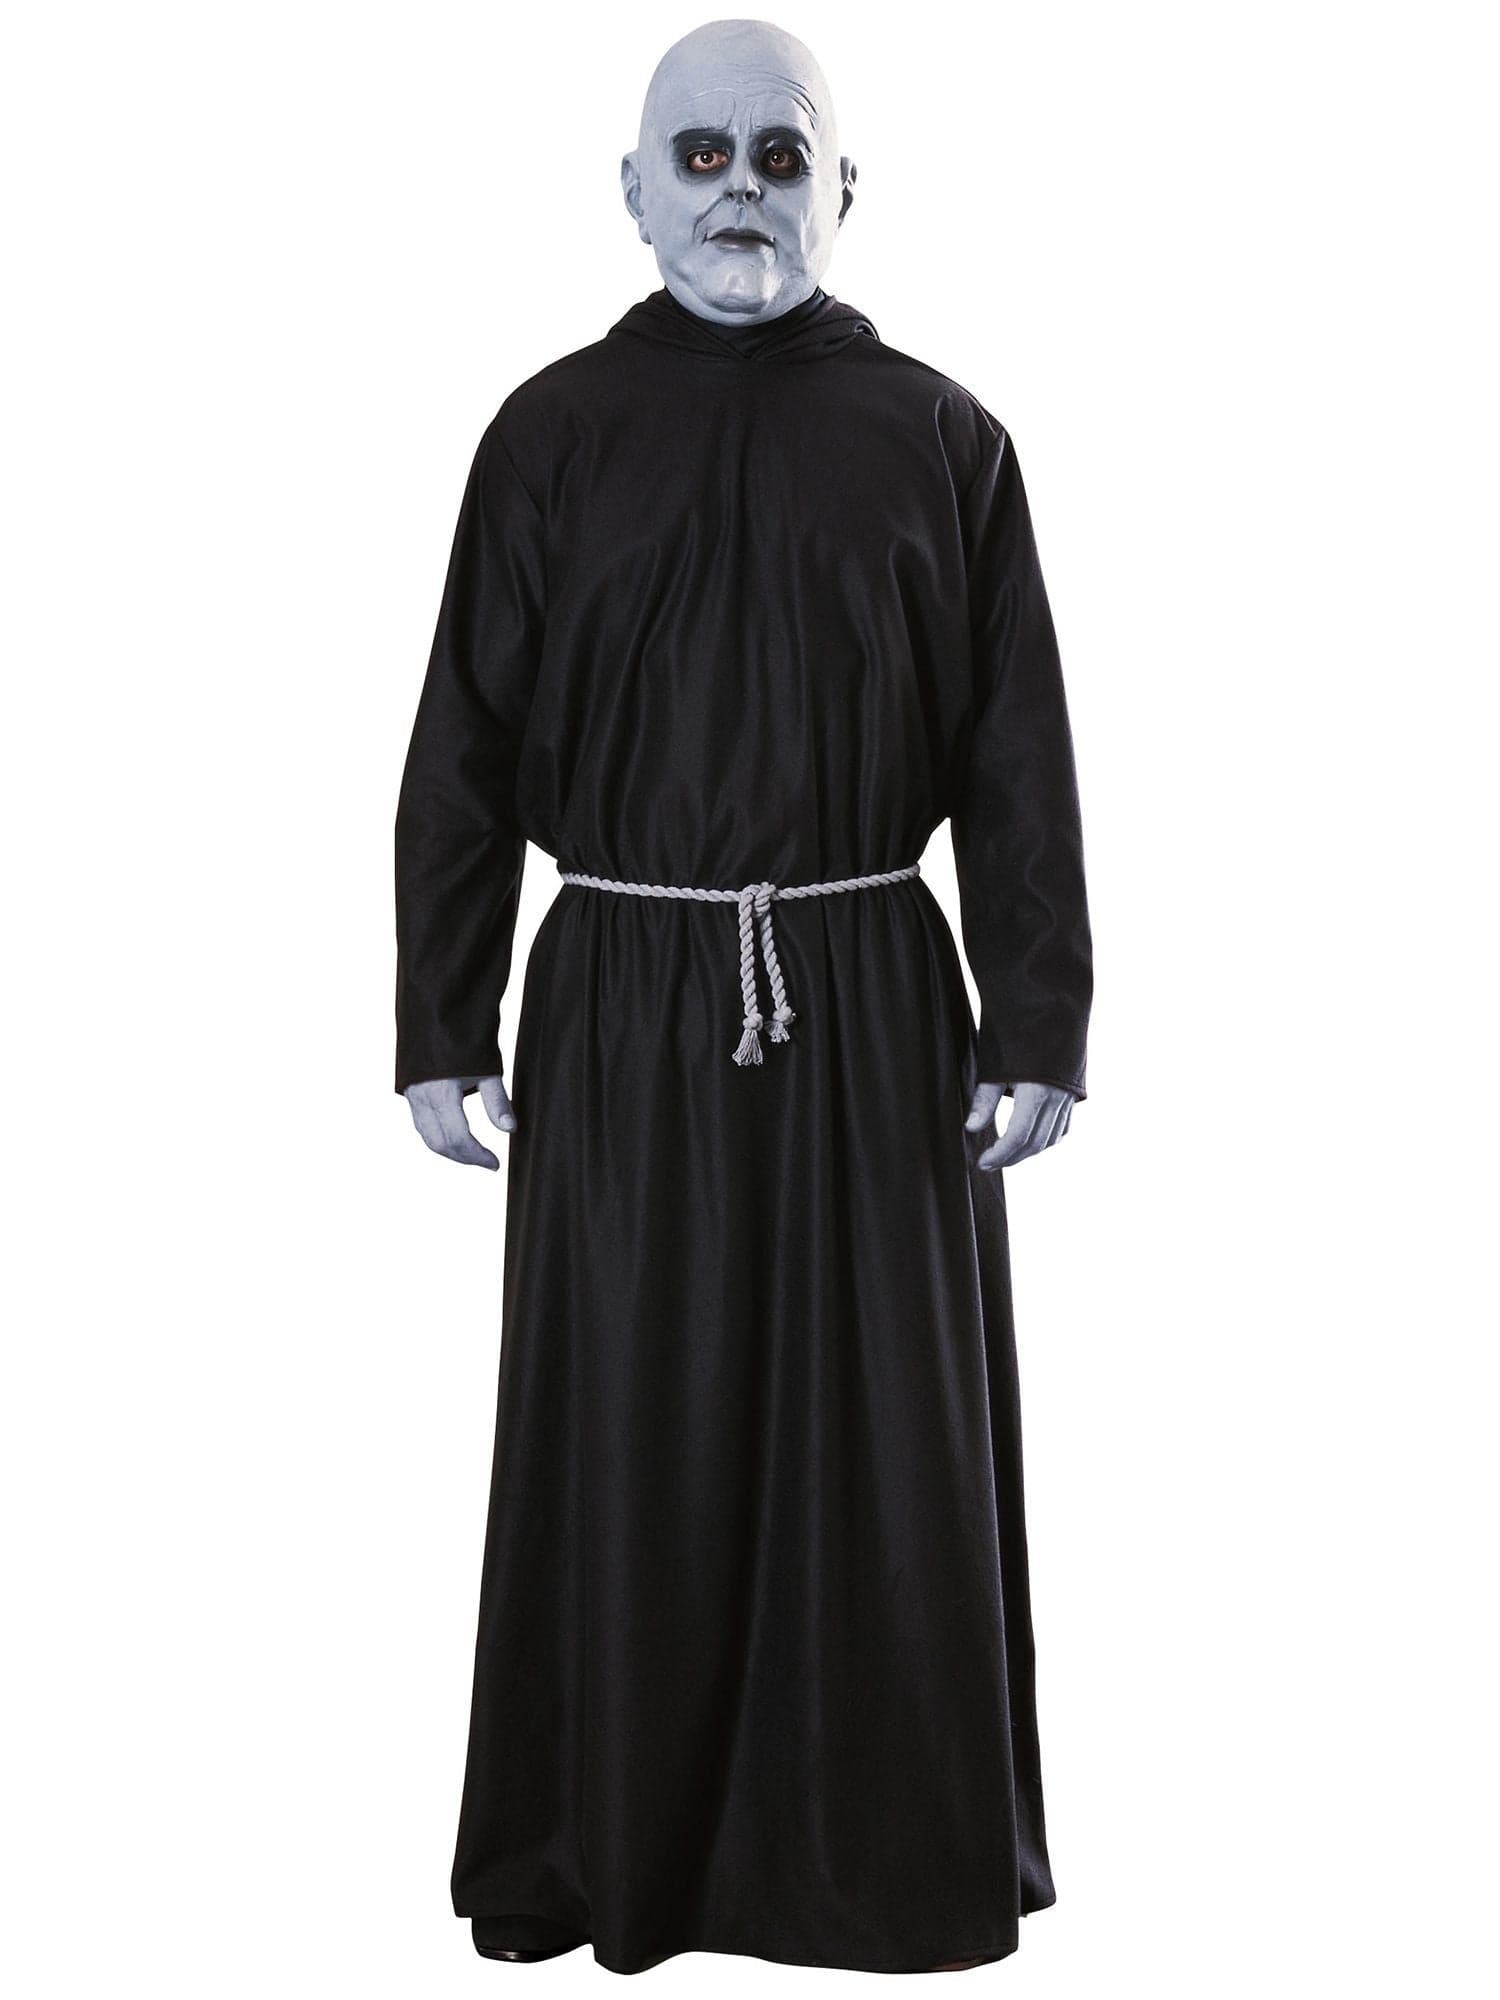 Adult Addams Family Uncle Fester Costume - costumes.com